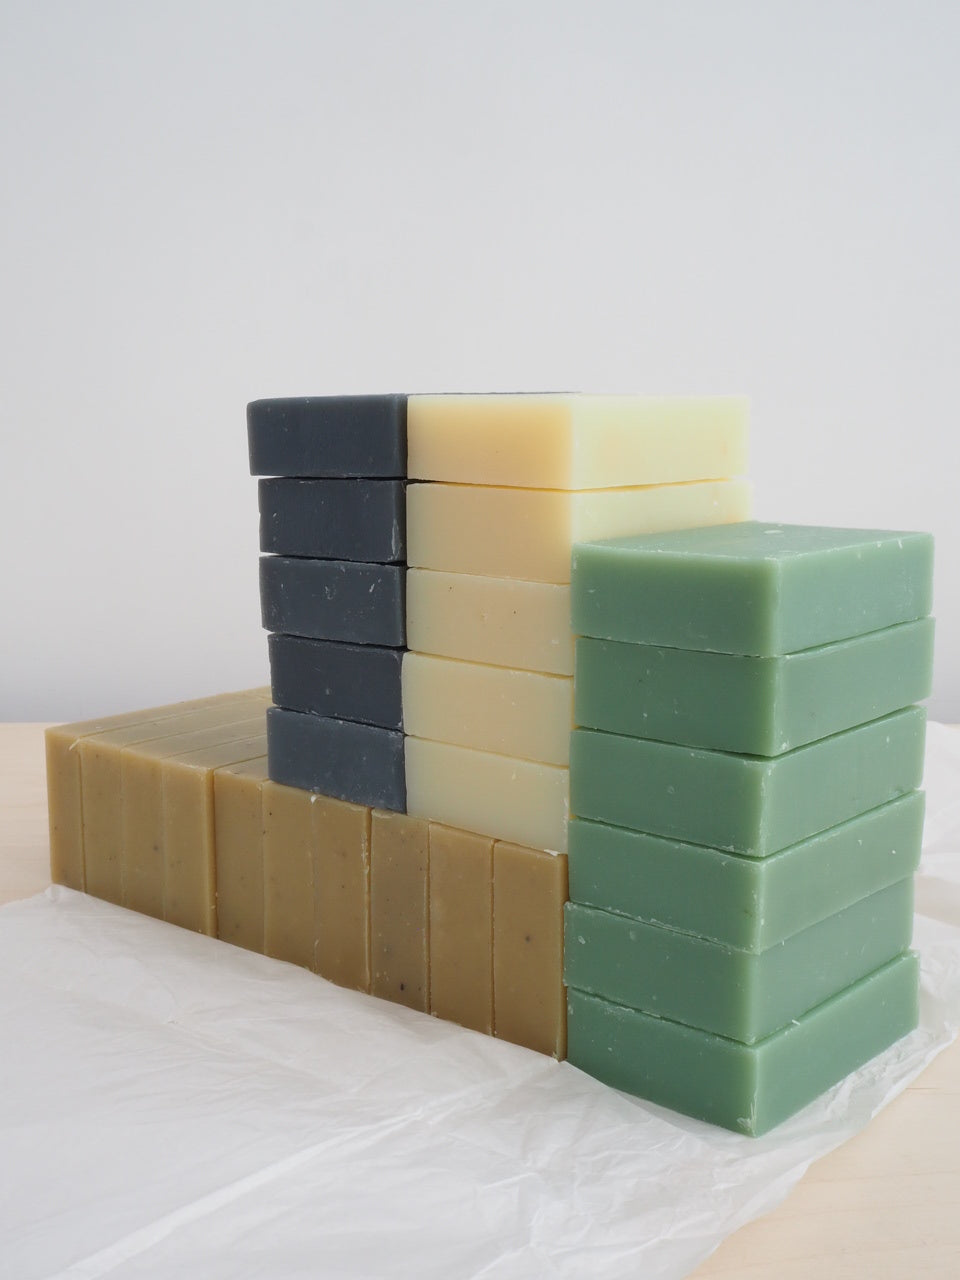 Blue earth soap - Olive, avocado and lime